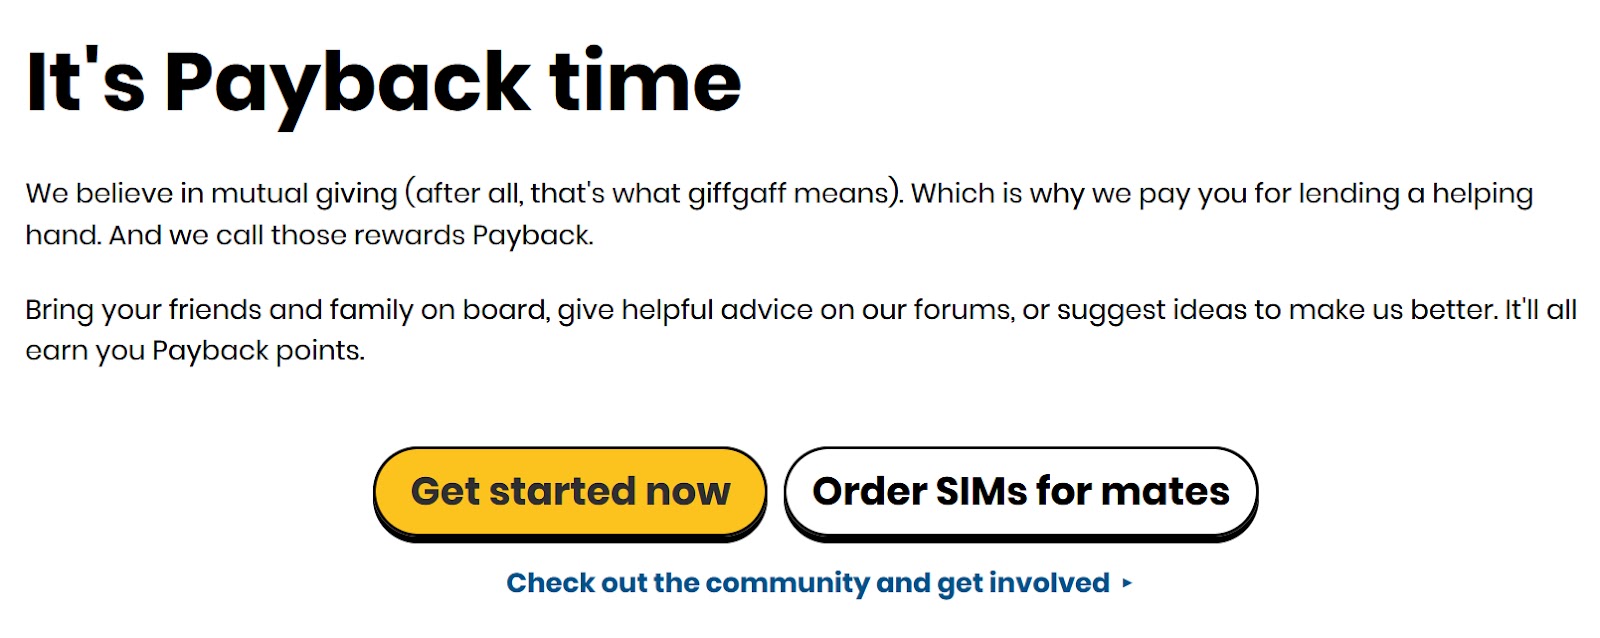 Giffgaff's "It's Payback time" program